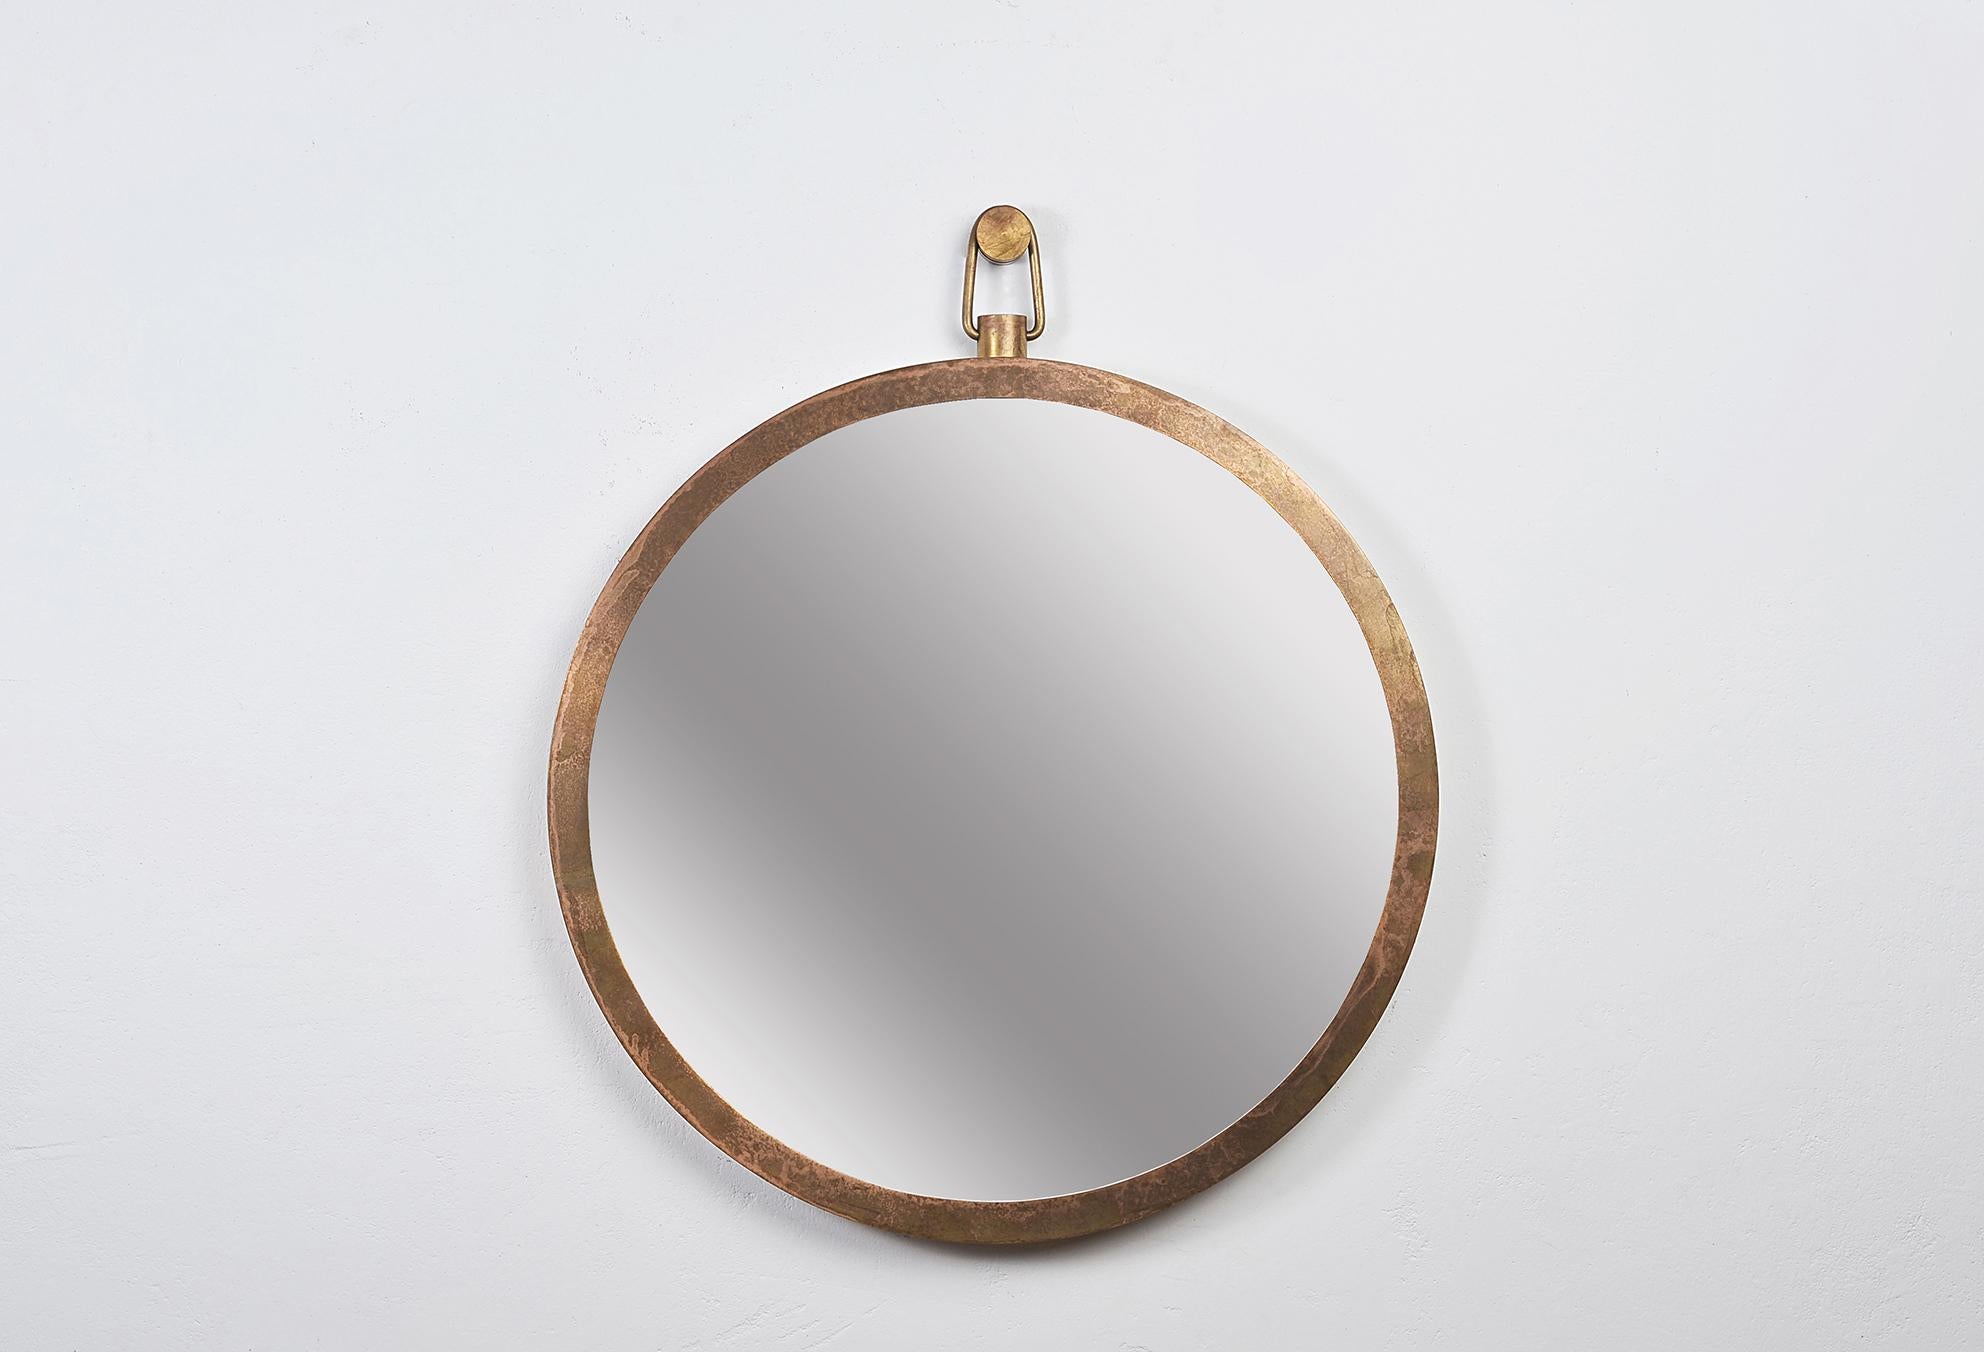 “Plain” brass frame mirror by Lukasz Friedrich.
Dimensions: D 65 cm.
Materials: Patinated brass, mirror.

Comes with wall fixation.

Lukasz Friedrich (born 1980), lives and works in Warsaw. He is a self-taught
Designer and craftsman. Lukasz